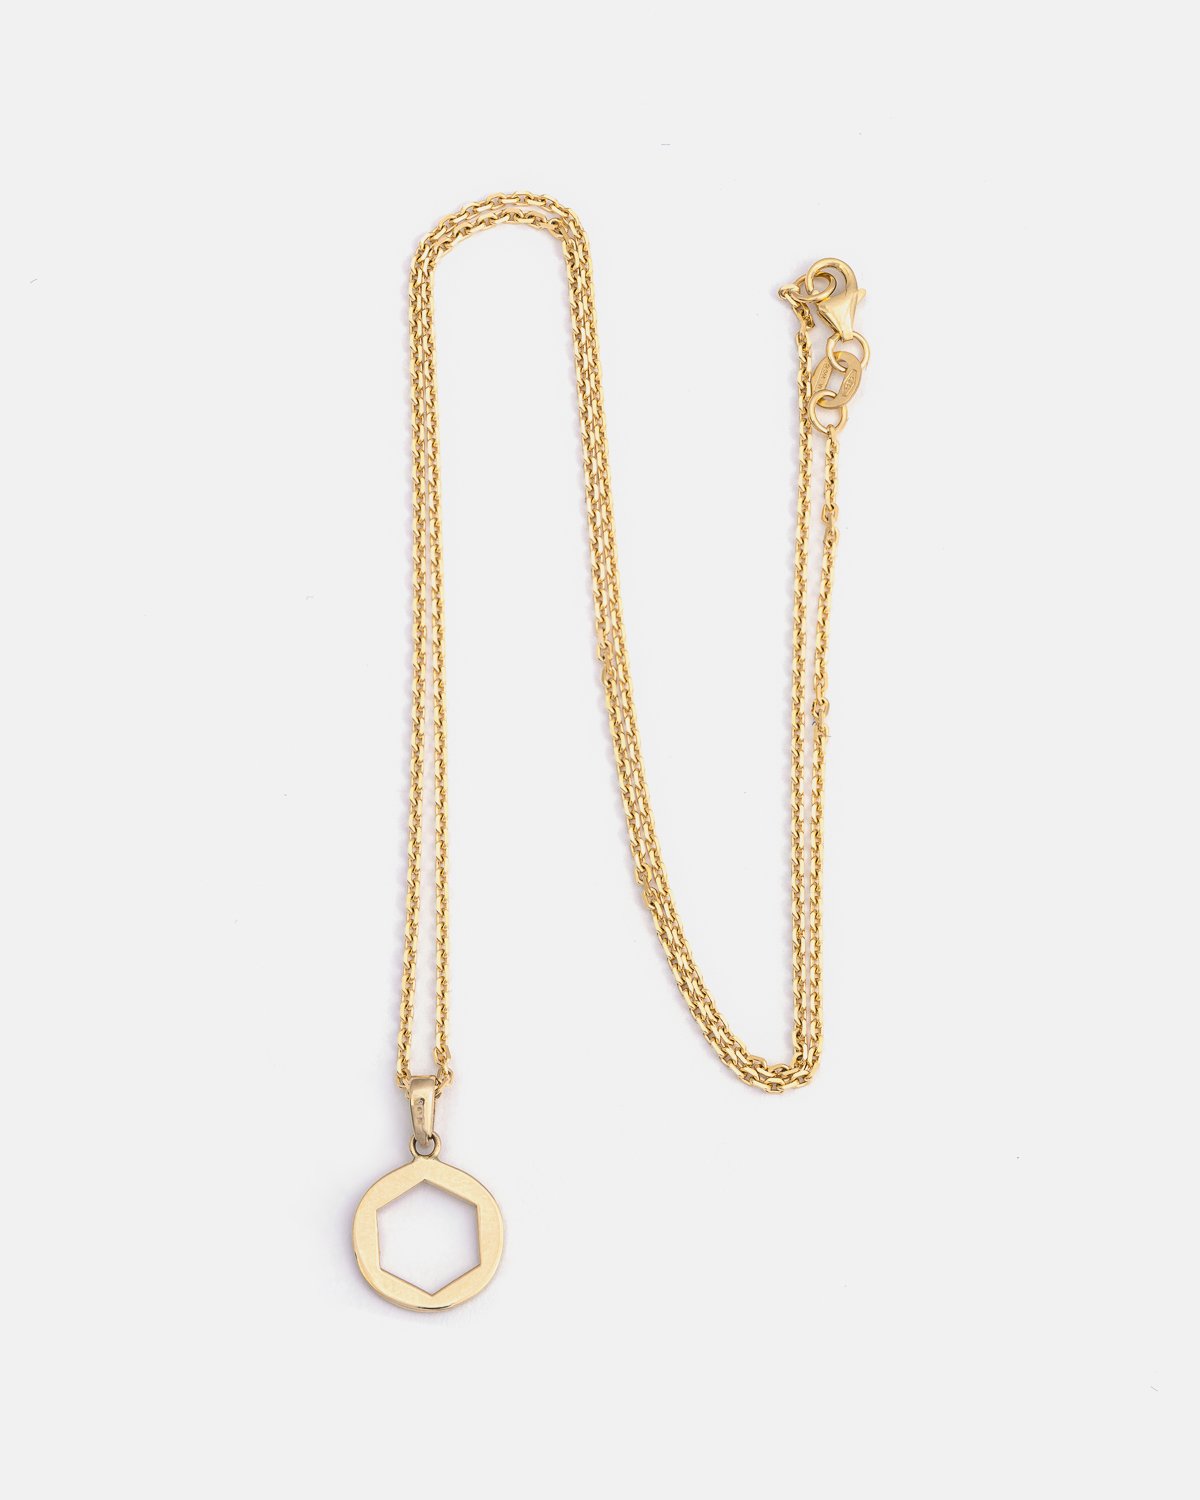 Alveole Necklace in Gold